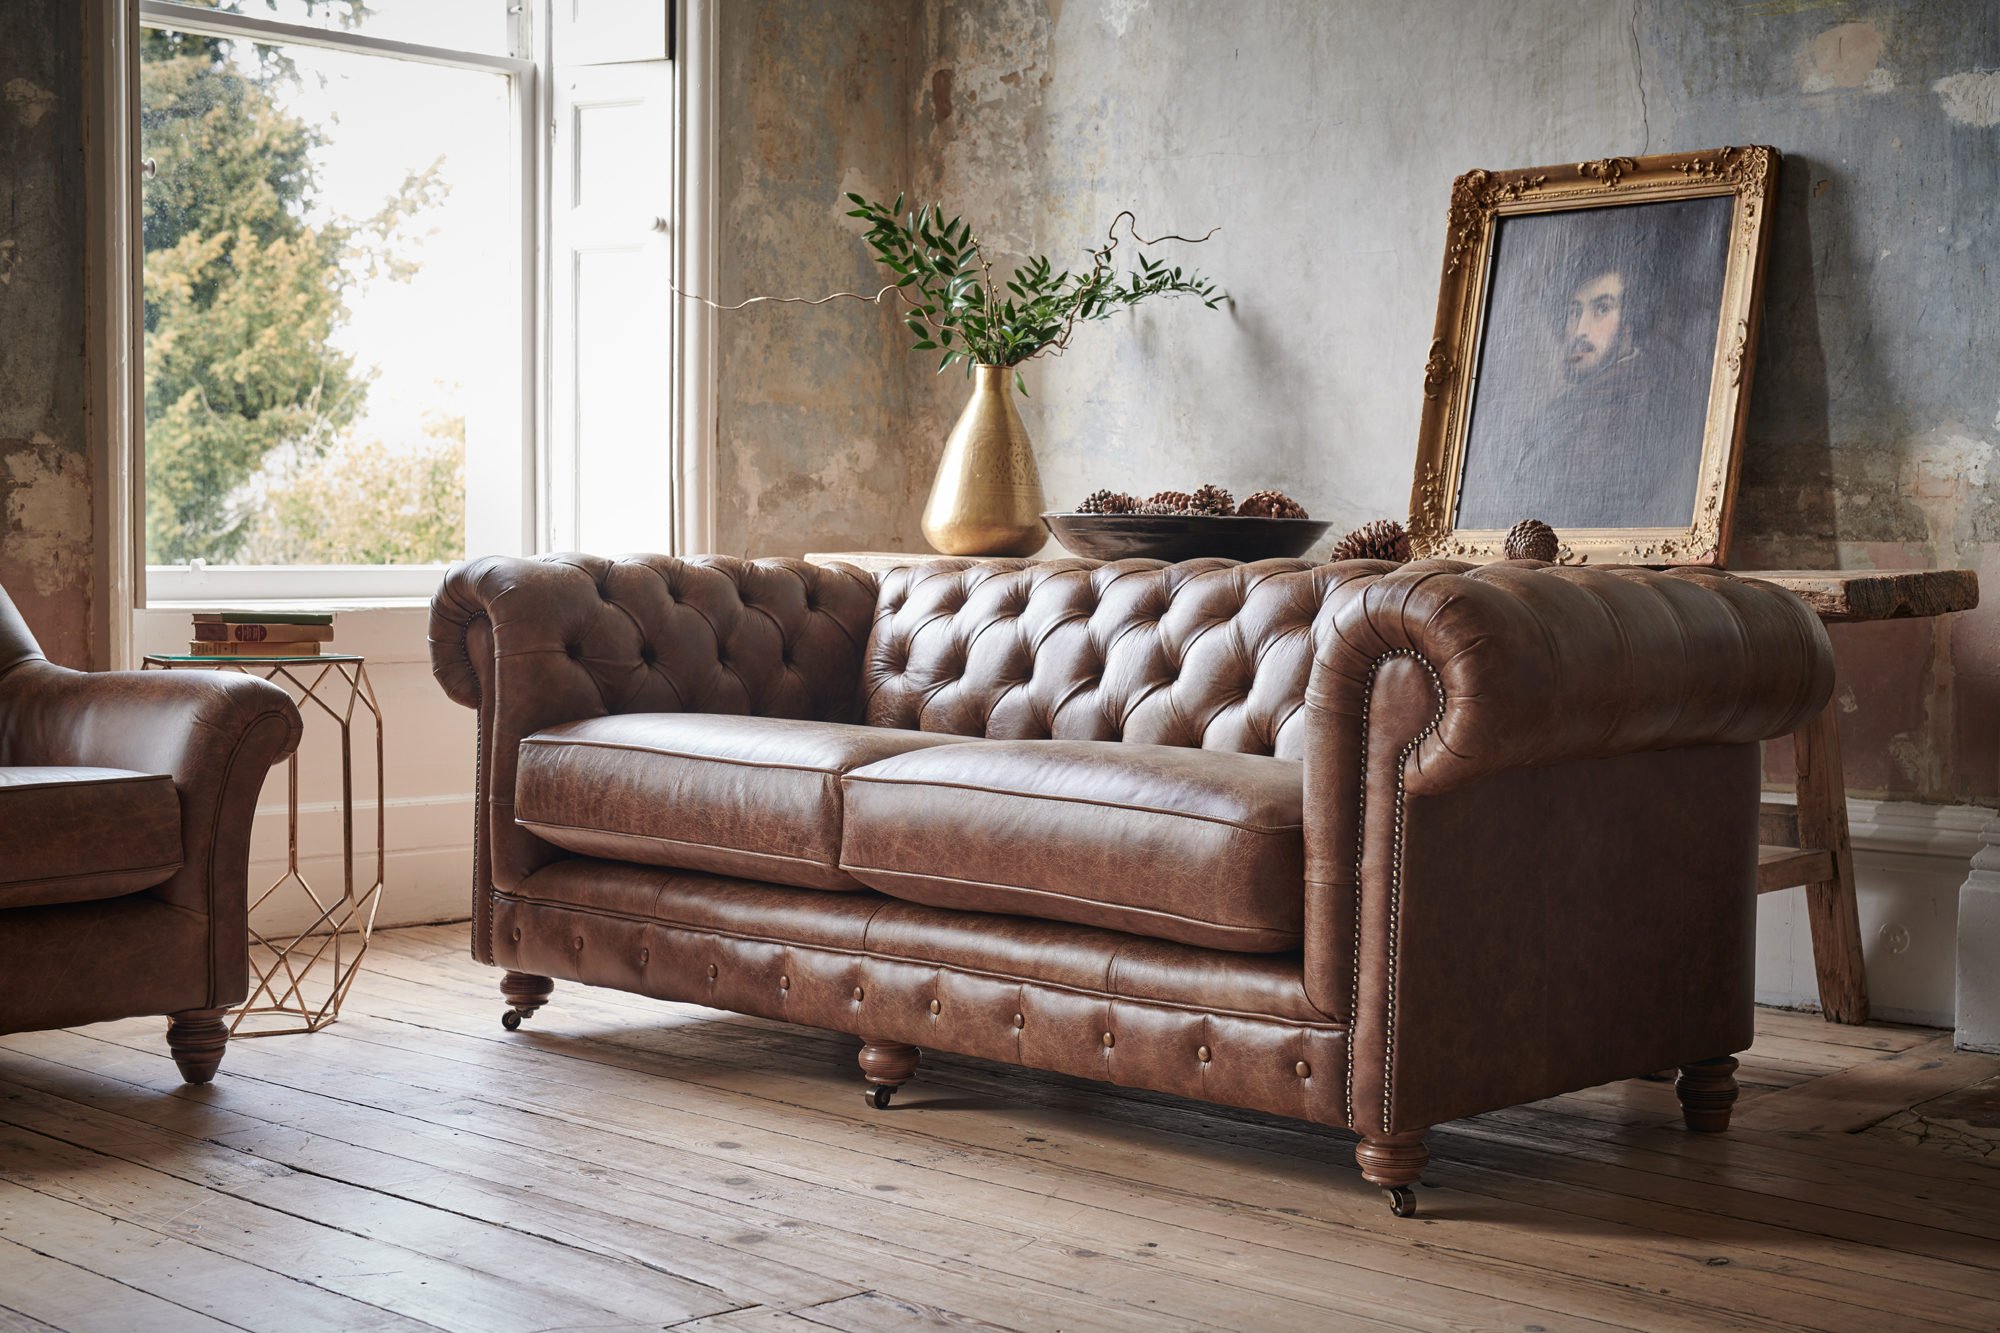 Handmade Leather Chesterfield Sofa, Elite Leather Furniture Reviews